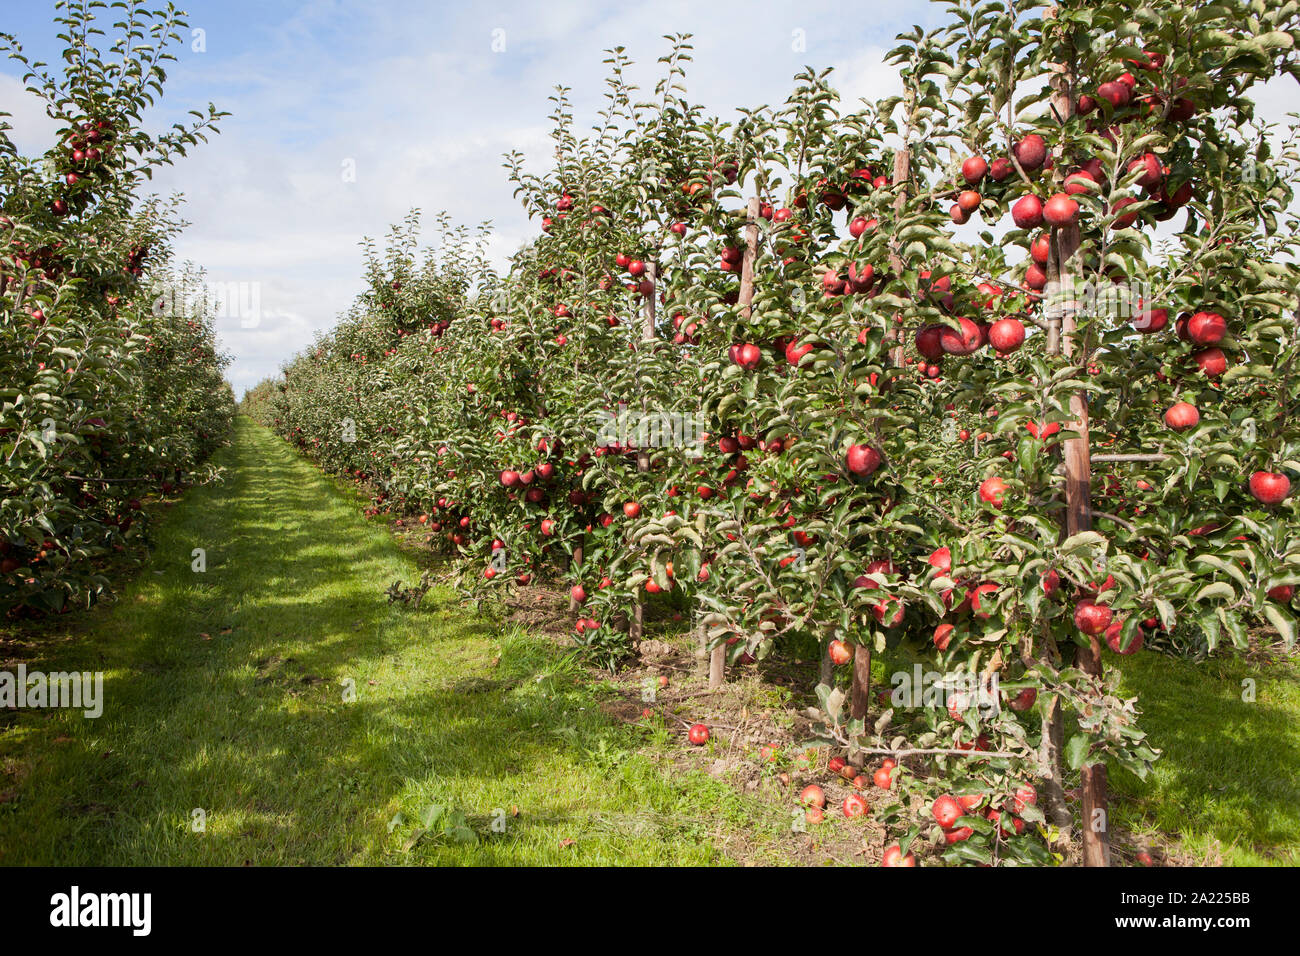 Red ripe apples, apple plantation, Altes Land, Lower Saxony, Germany, Europe Stock Photo